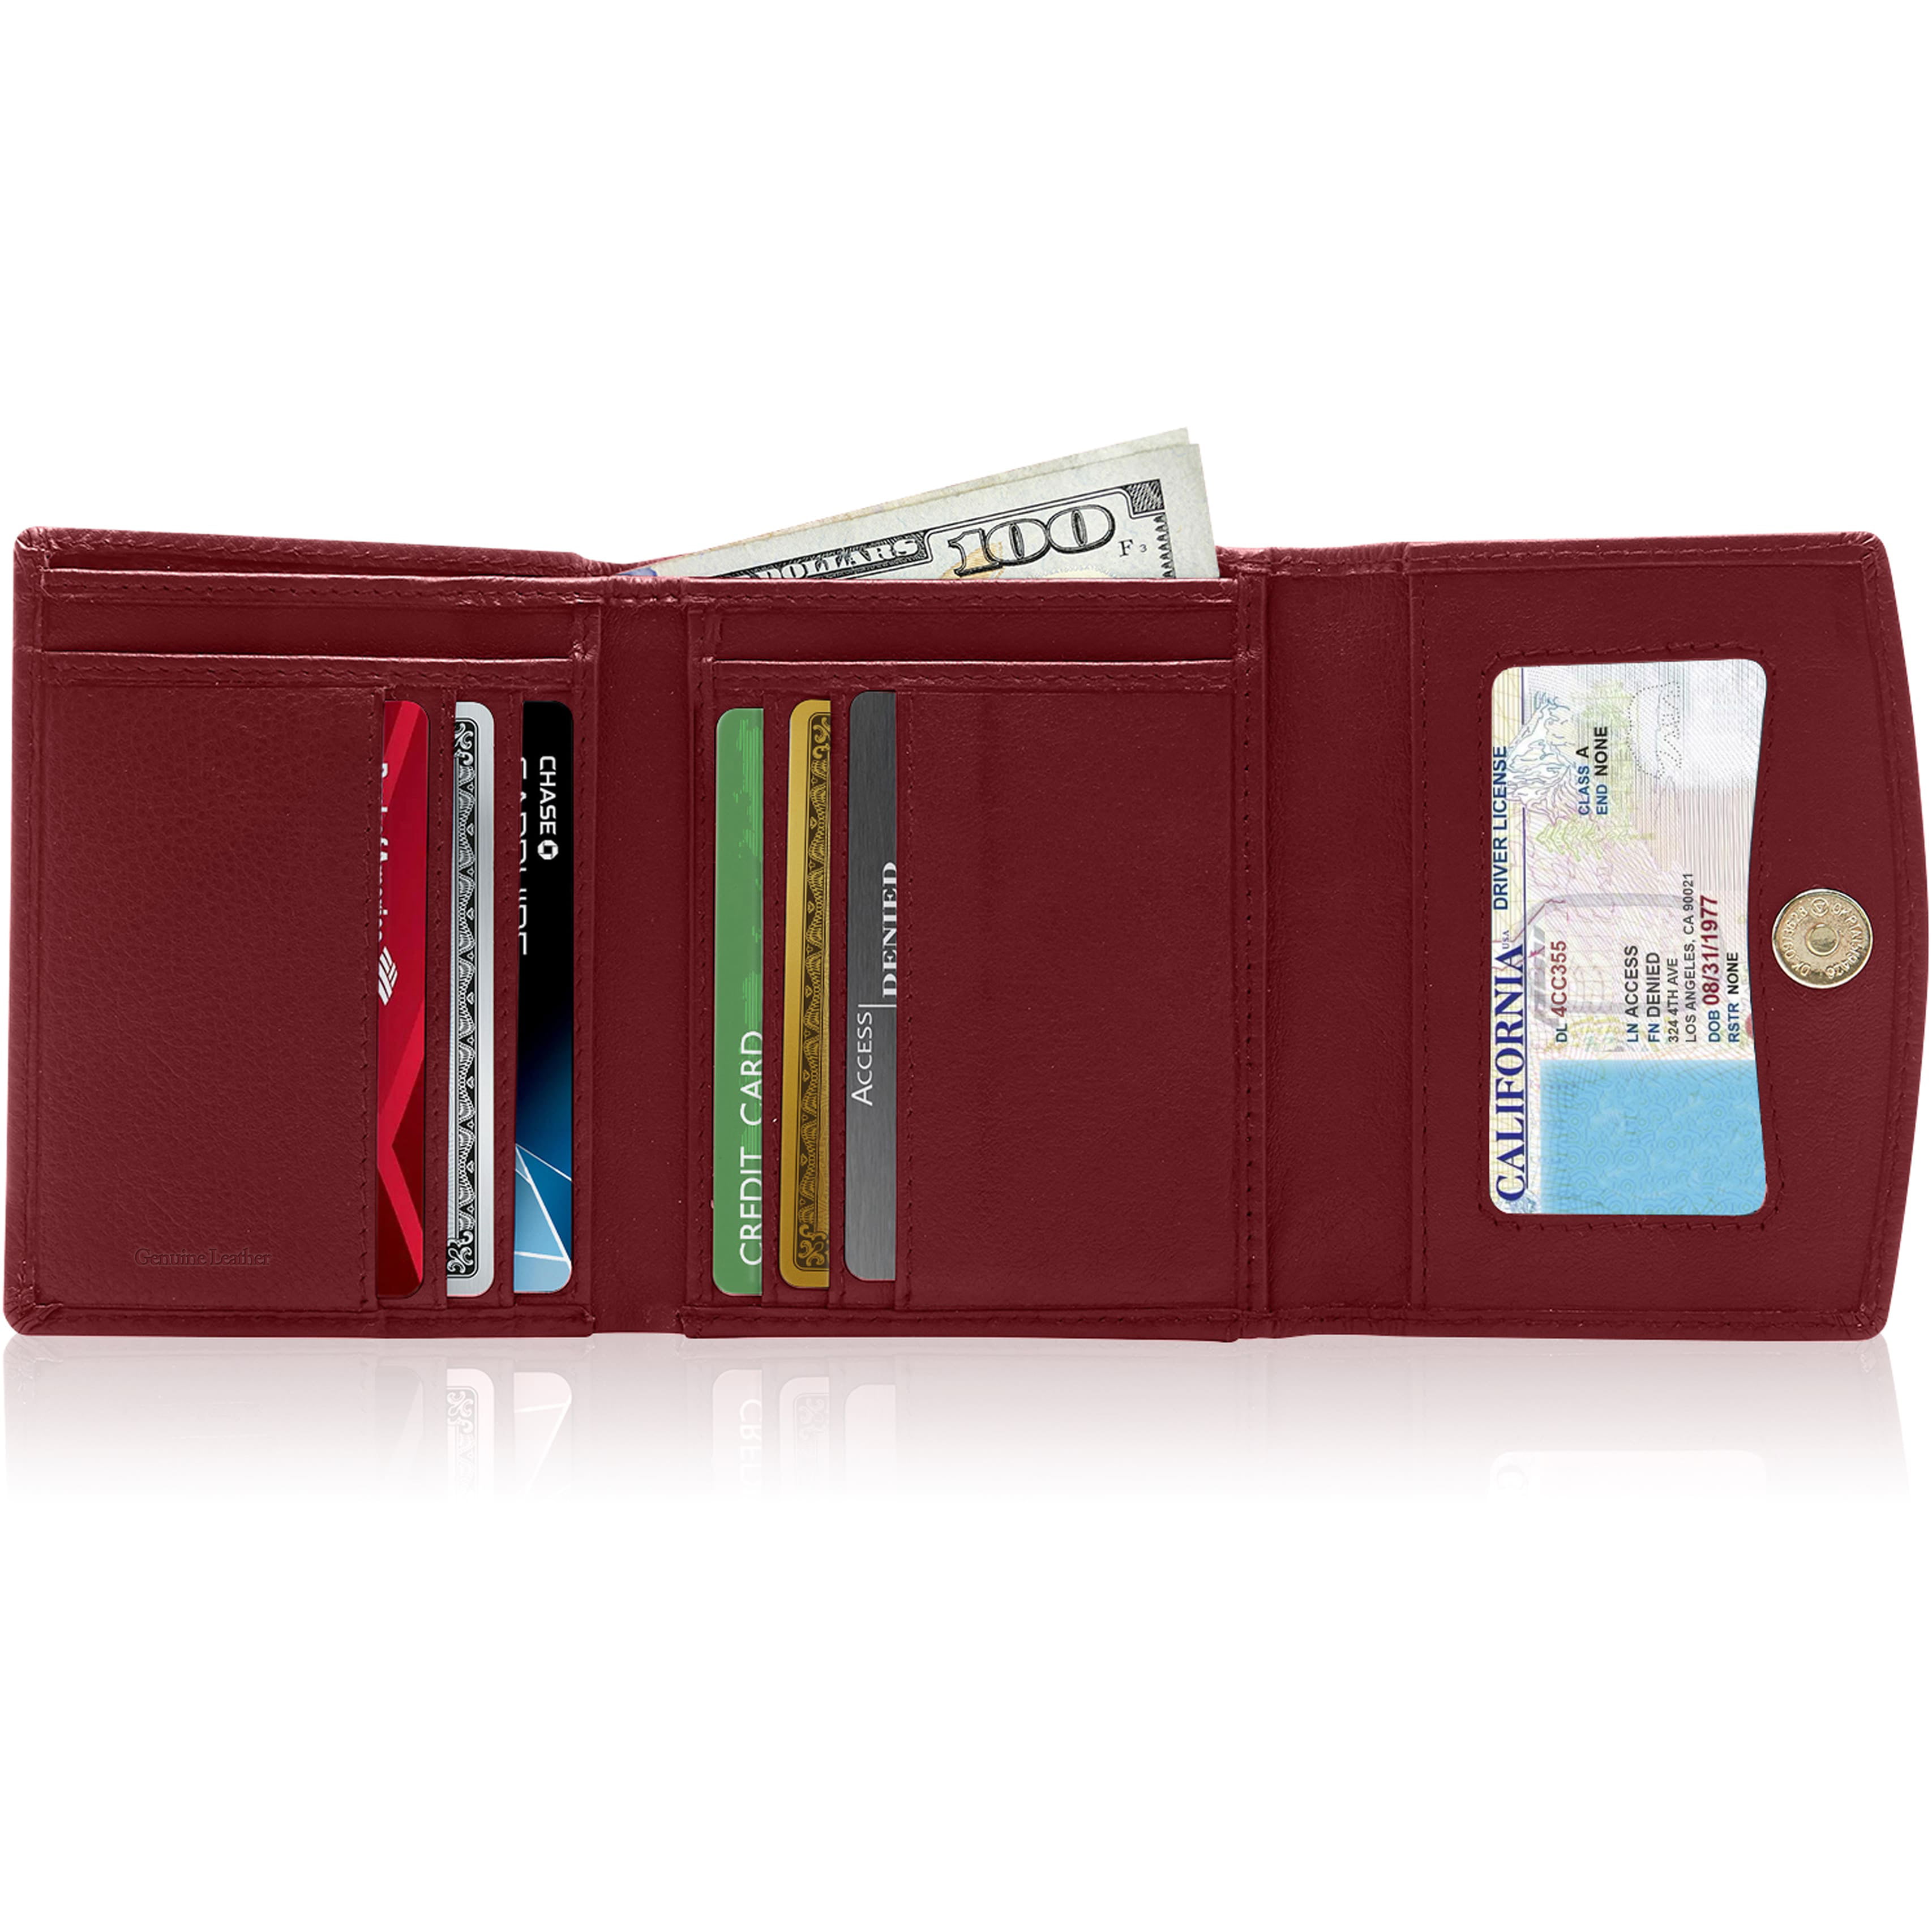 BLACK LEATHER Has 12 Credit Cards Slots Super Soft Leather Credit Card Holder With Popper Fastening